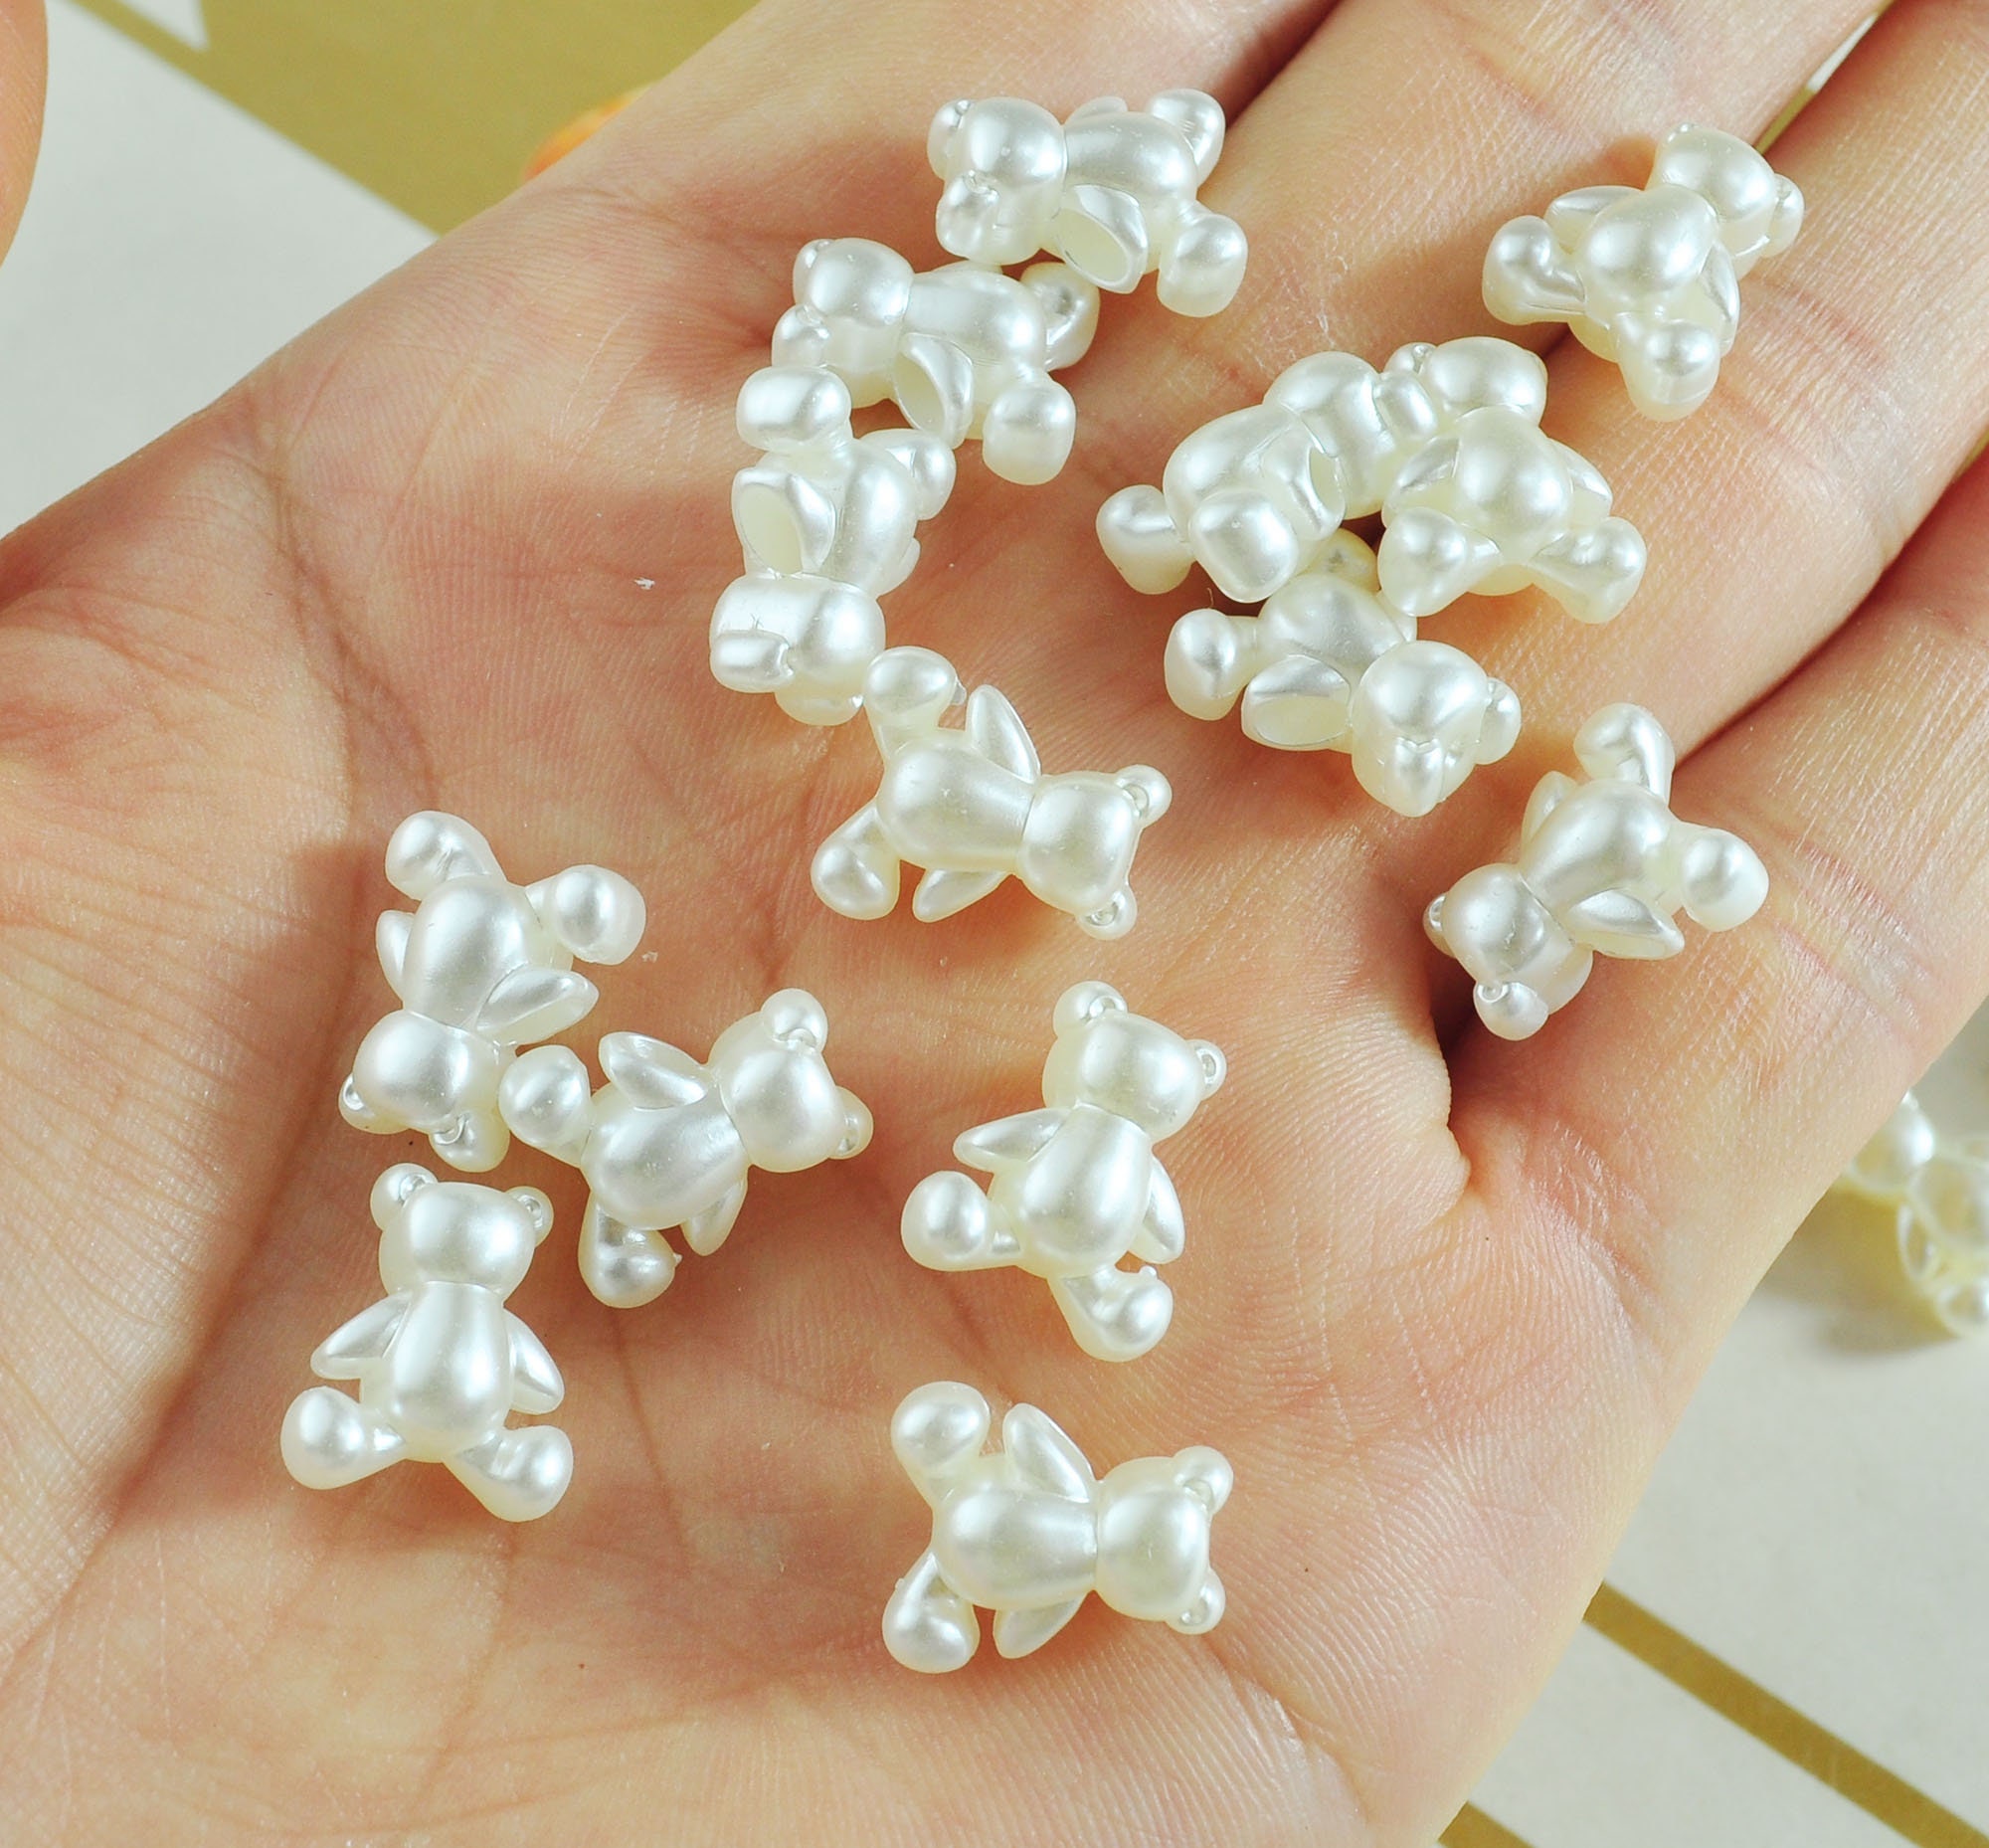 50Pcs/Lot 5mm CCB Hearts Spacer Loose Bead Charm Acrylic Beads for Bracelets  Necklaces Jewelry Making Findings Accessories - AliExpress